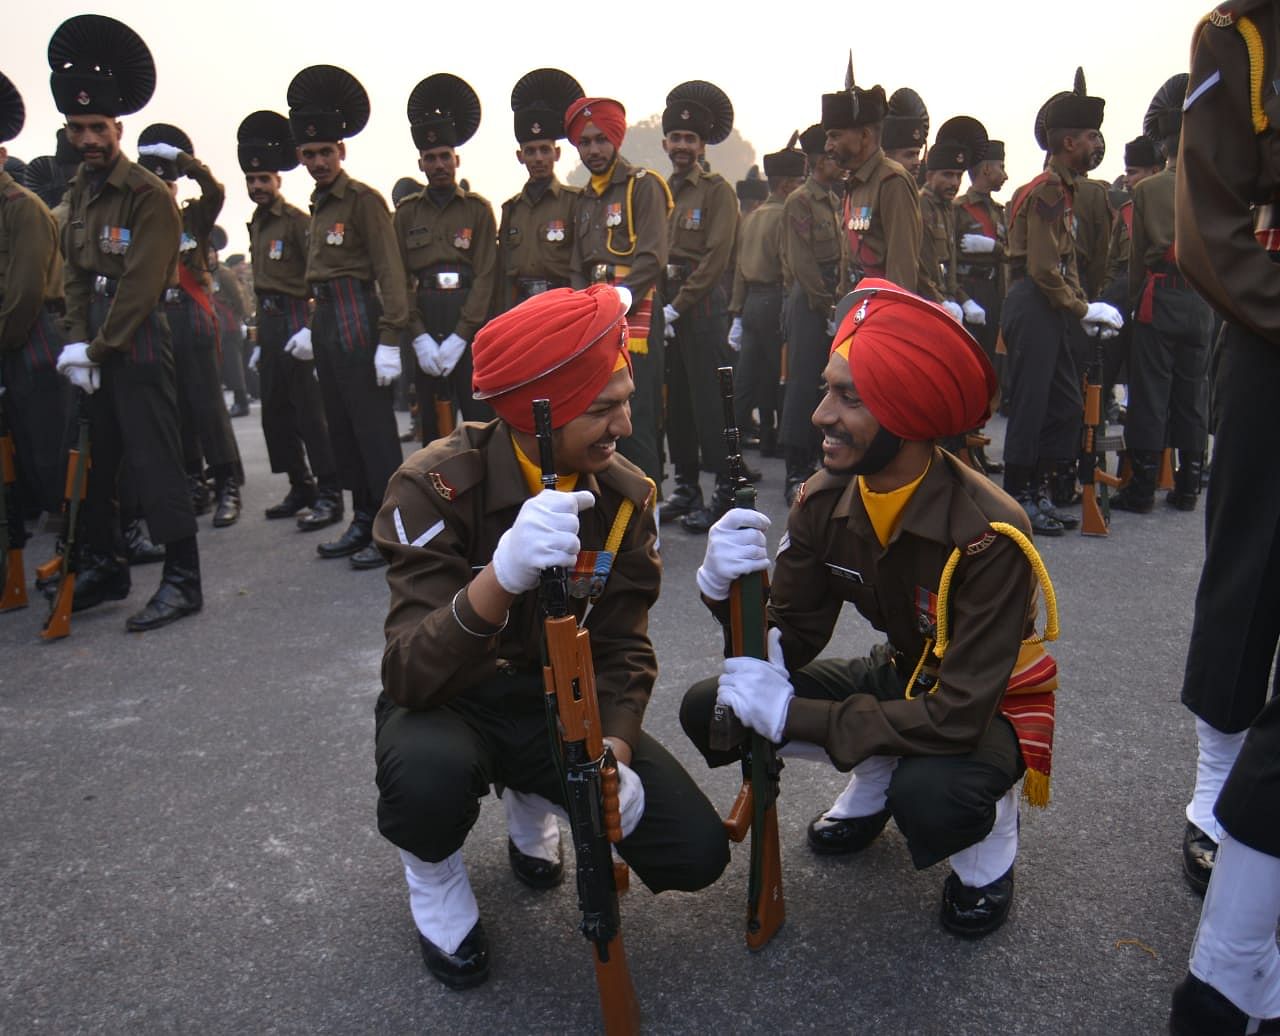 Officers of the Sikh regiment share a smile between rehearsals | Suraj Bhist/ThePrint